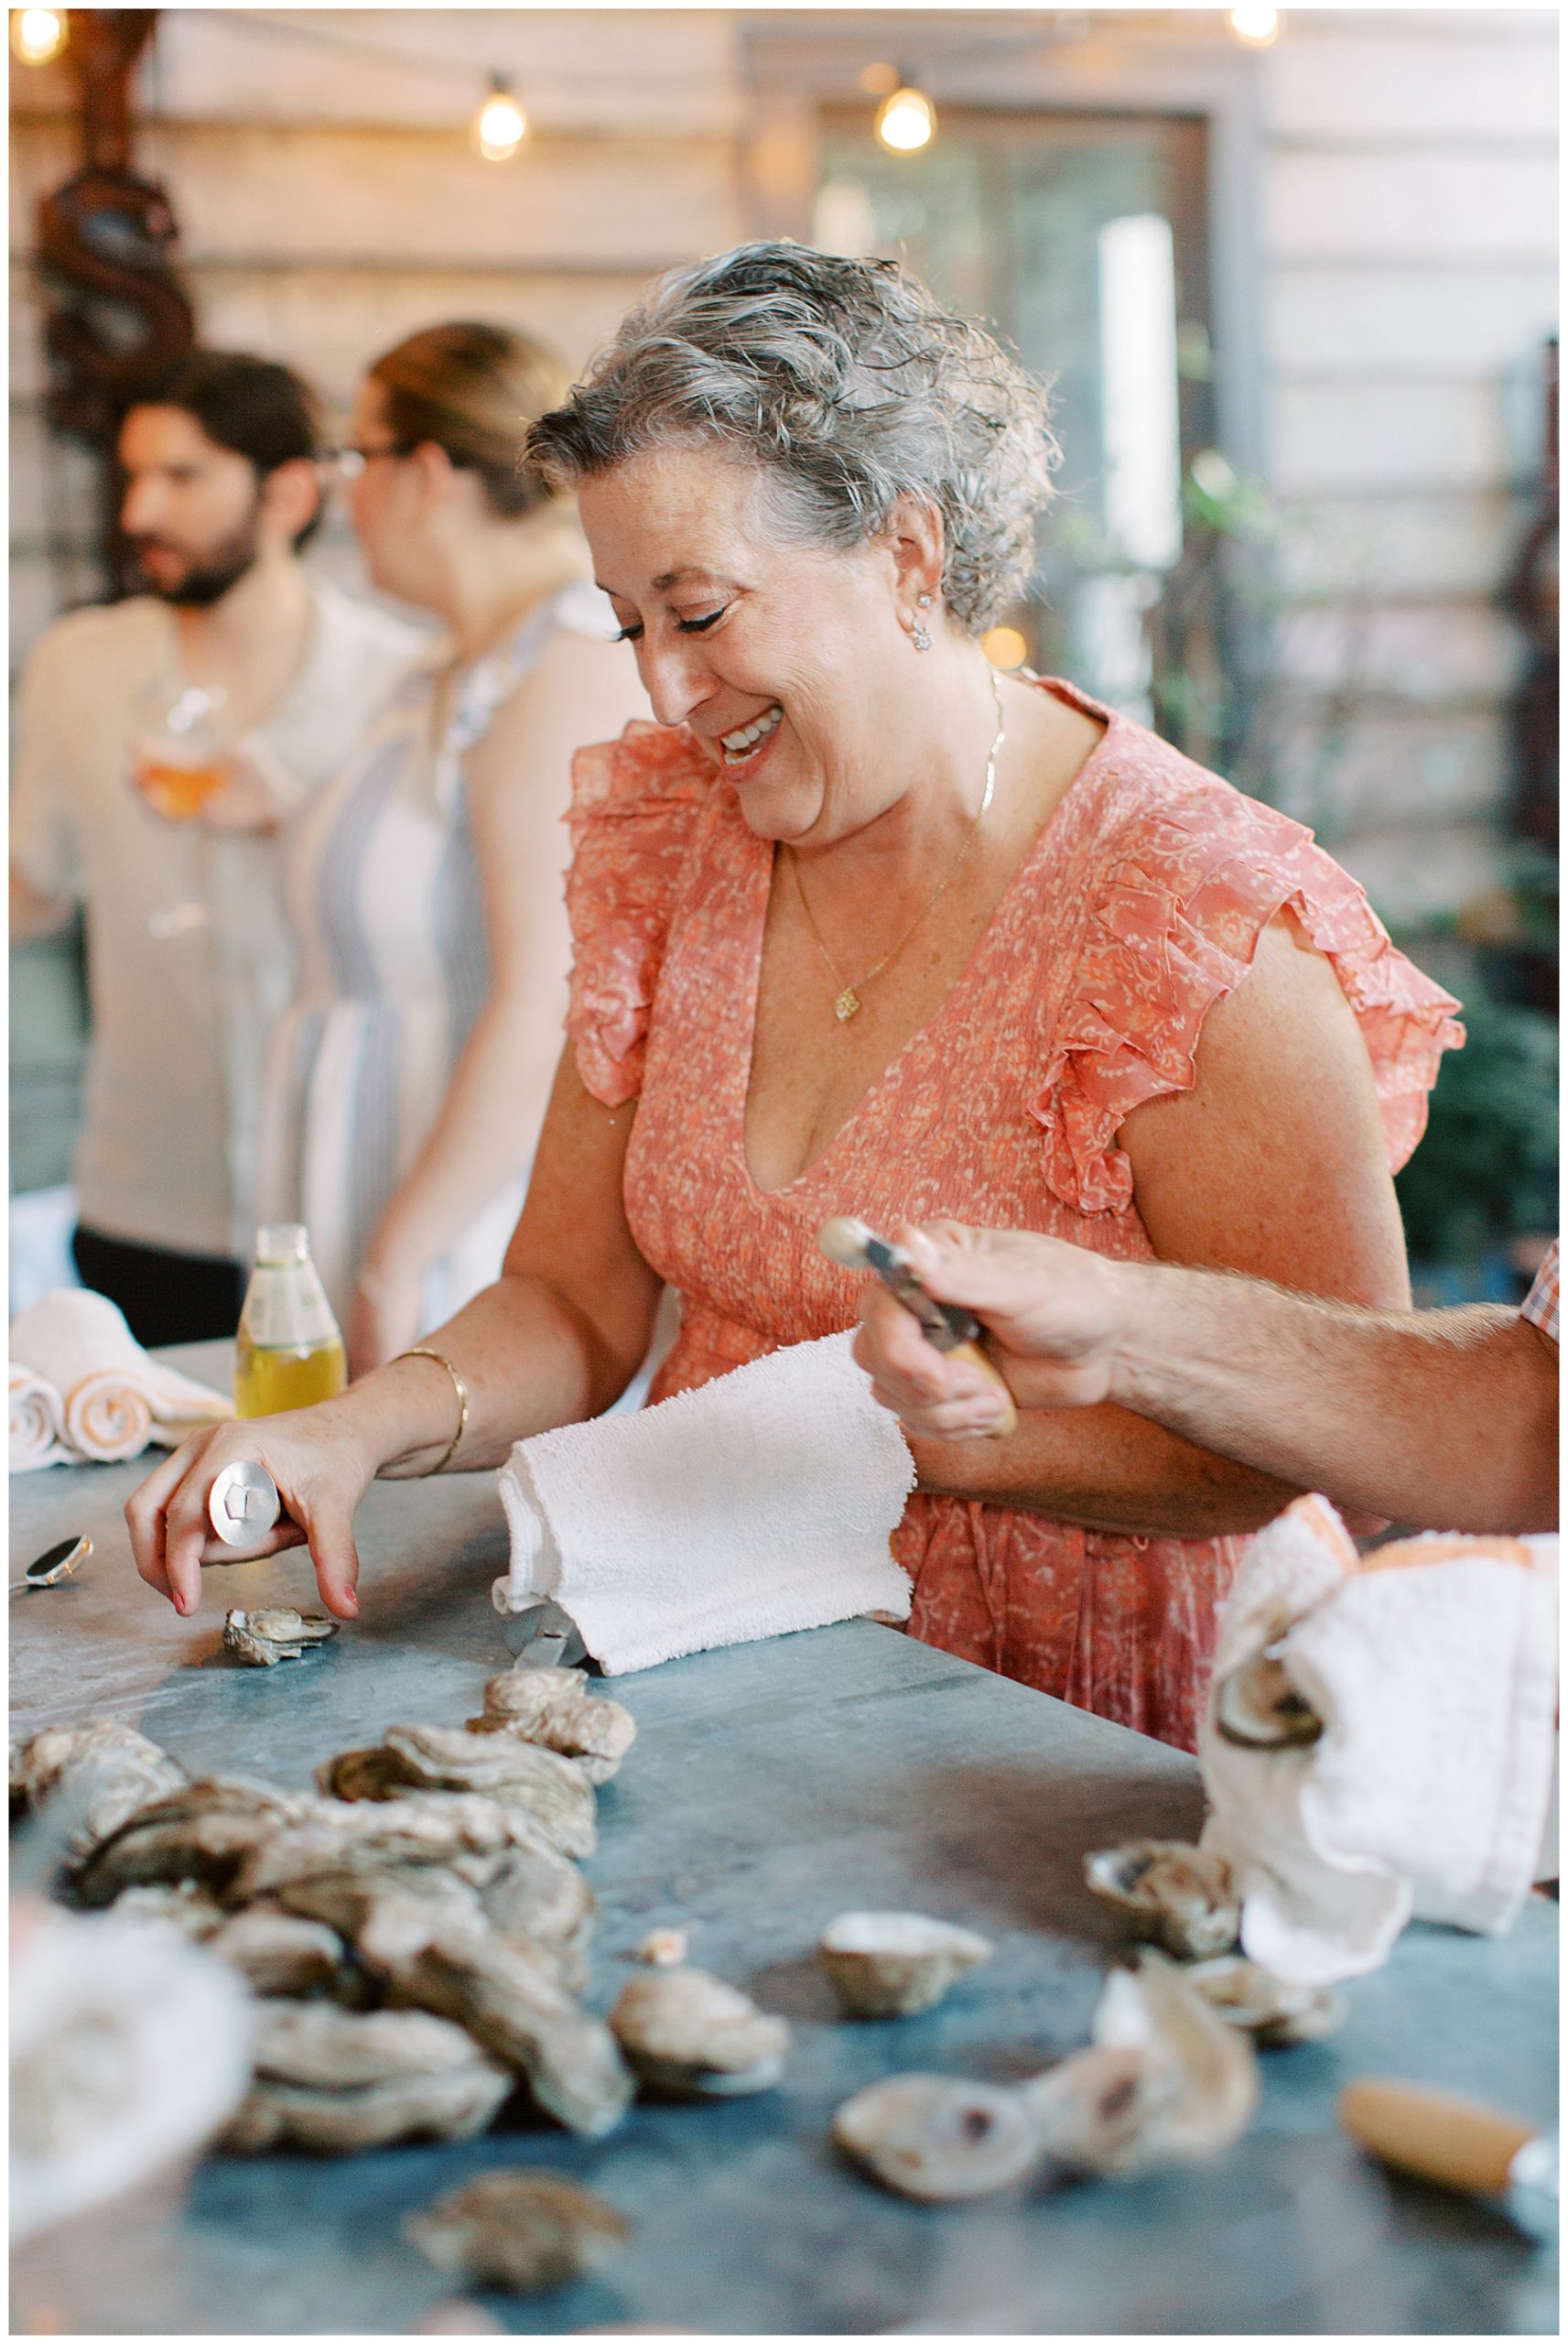 guests shuck oysters during reception party at Leon's Poultry & Oysters